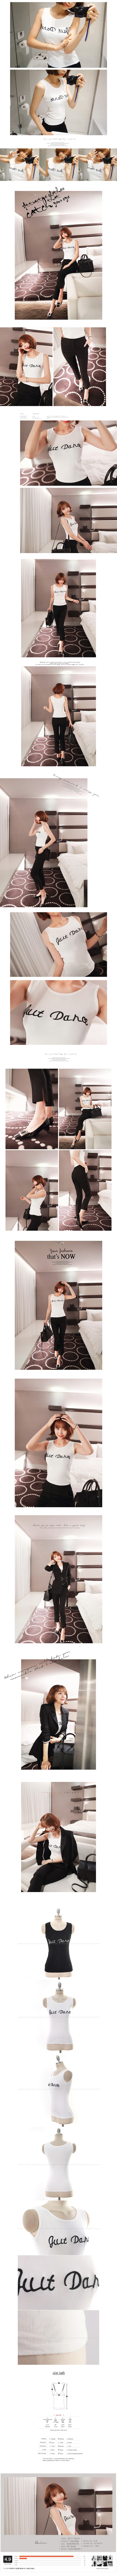 [Special Offer] Embroidery Premium Tank top White One Size(S-M